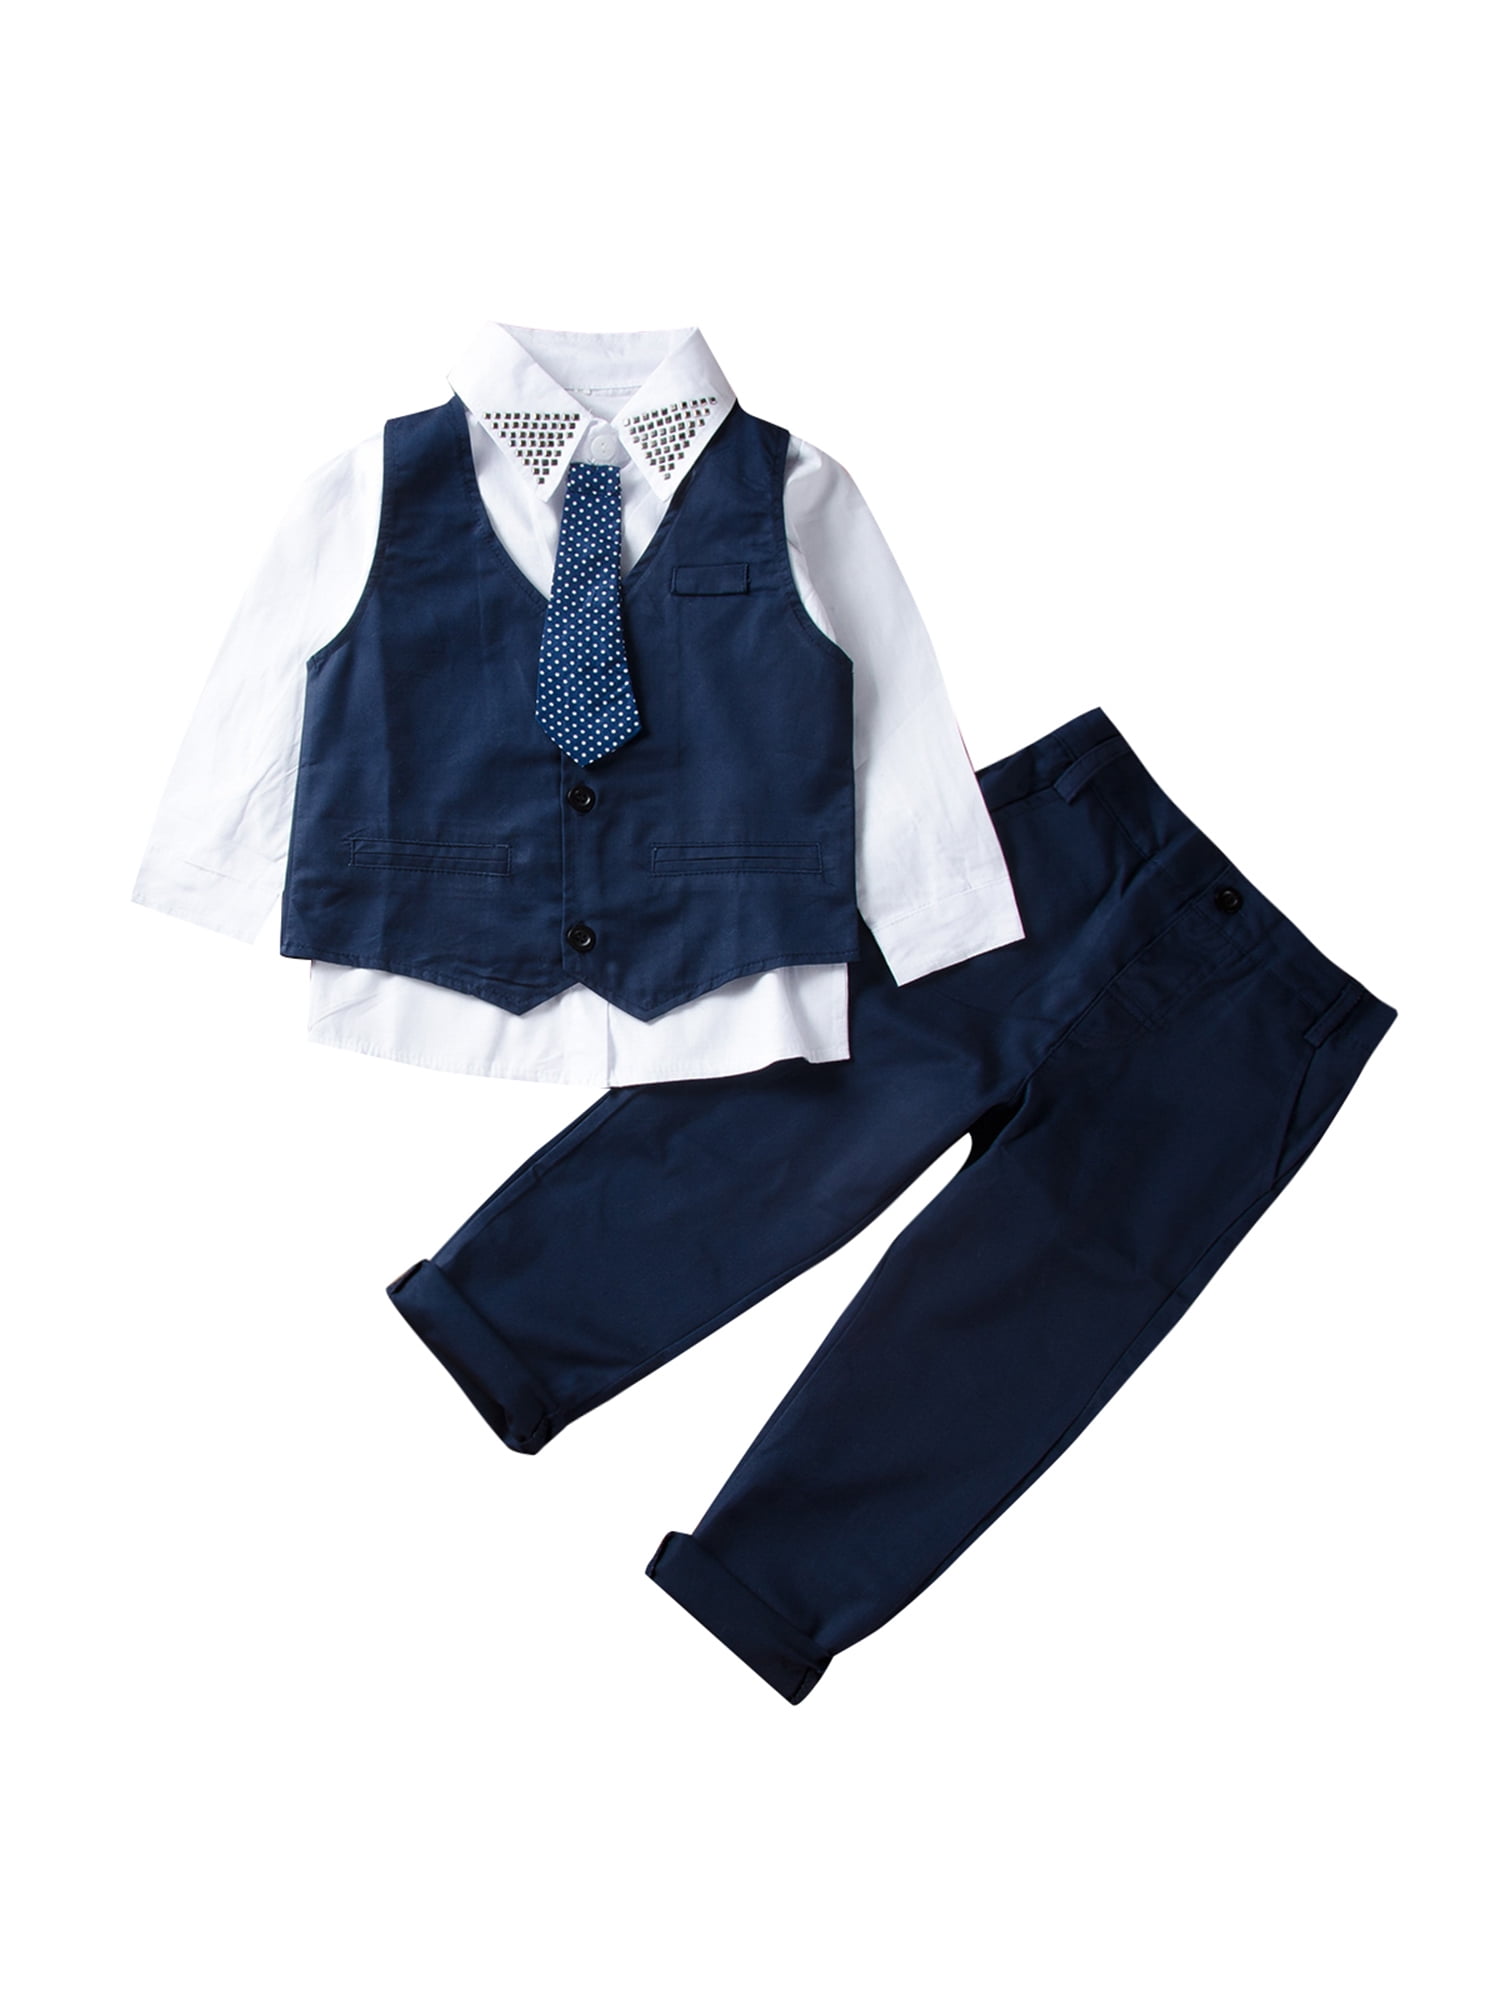 4Pcs Kids Baby Boys Gentleman Outfits Party Formal Suit+Shirt+Bow